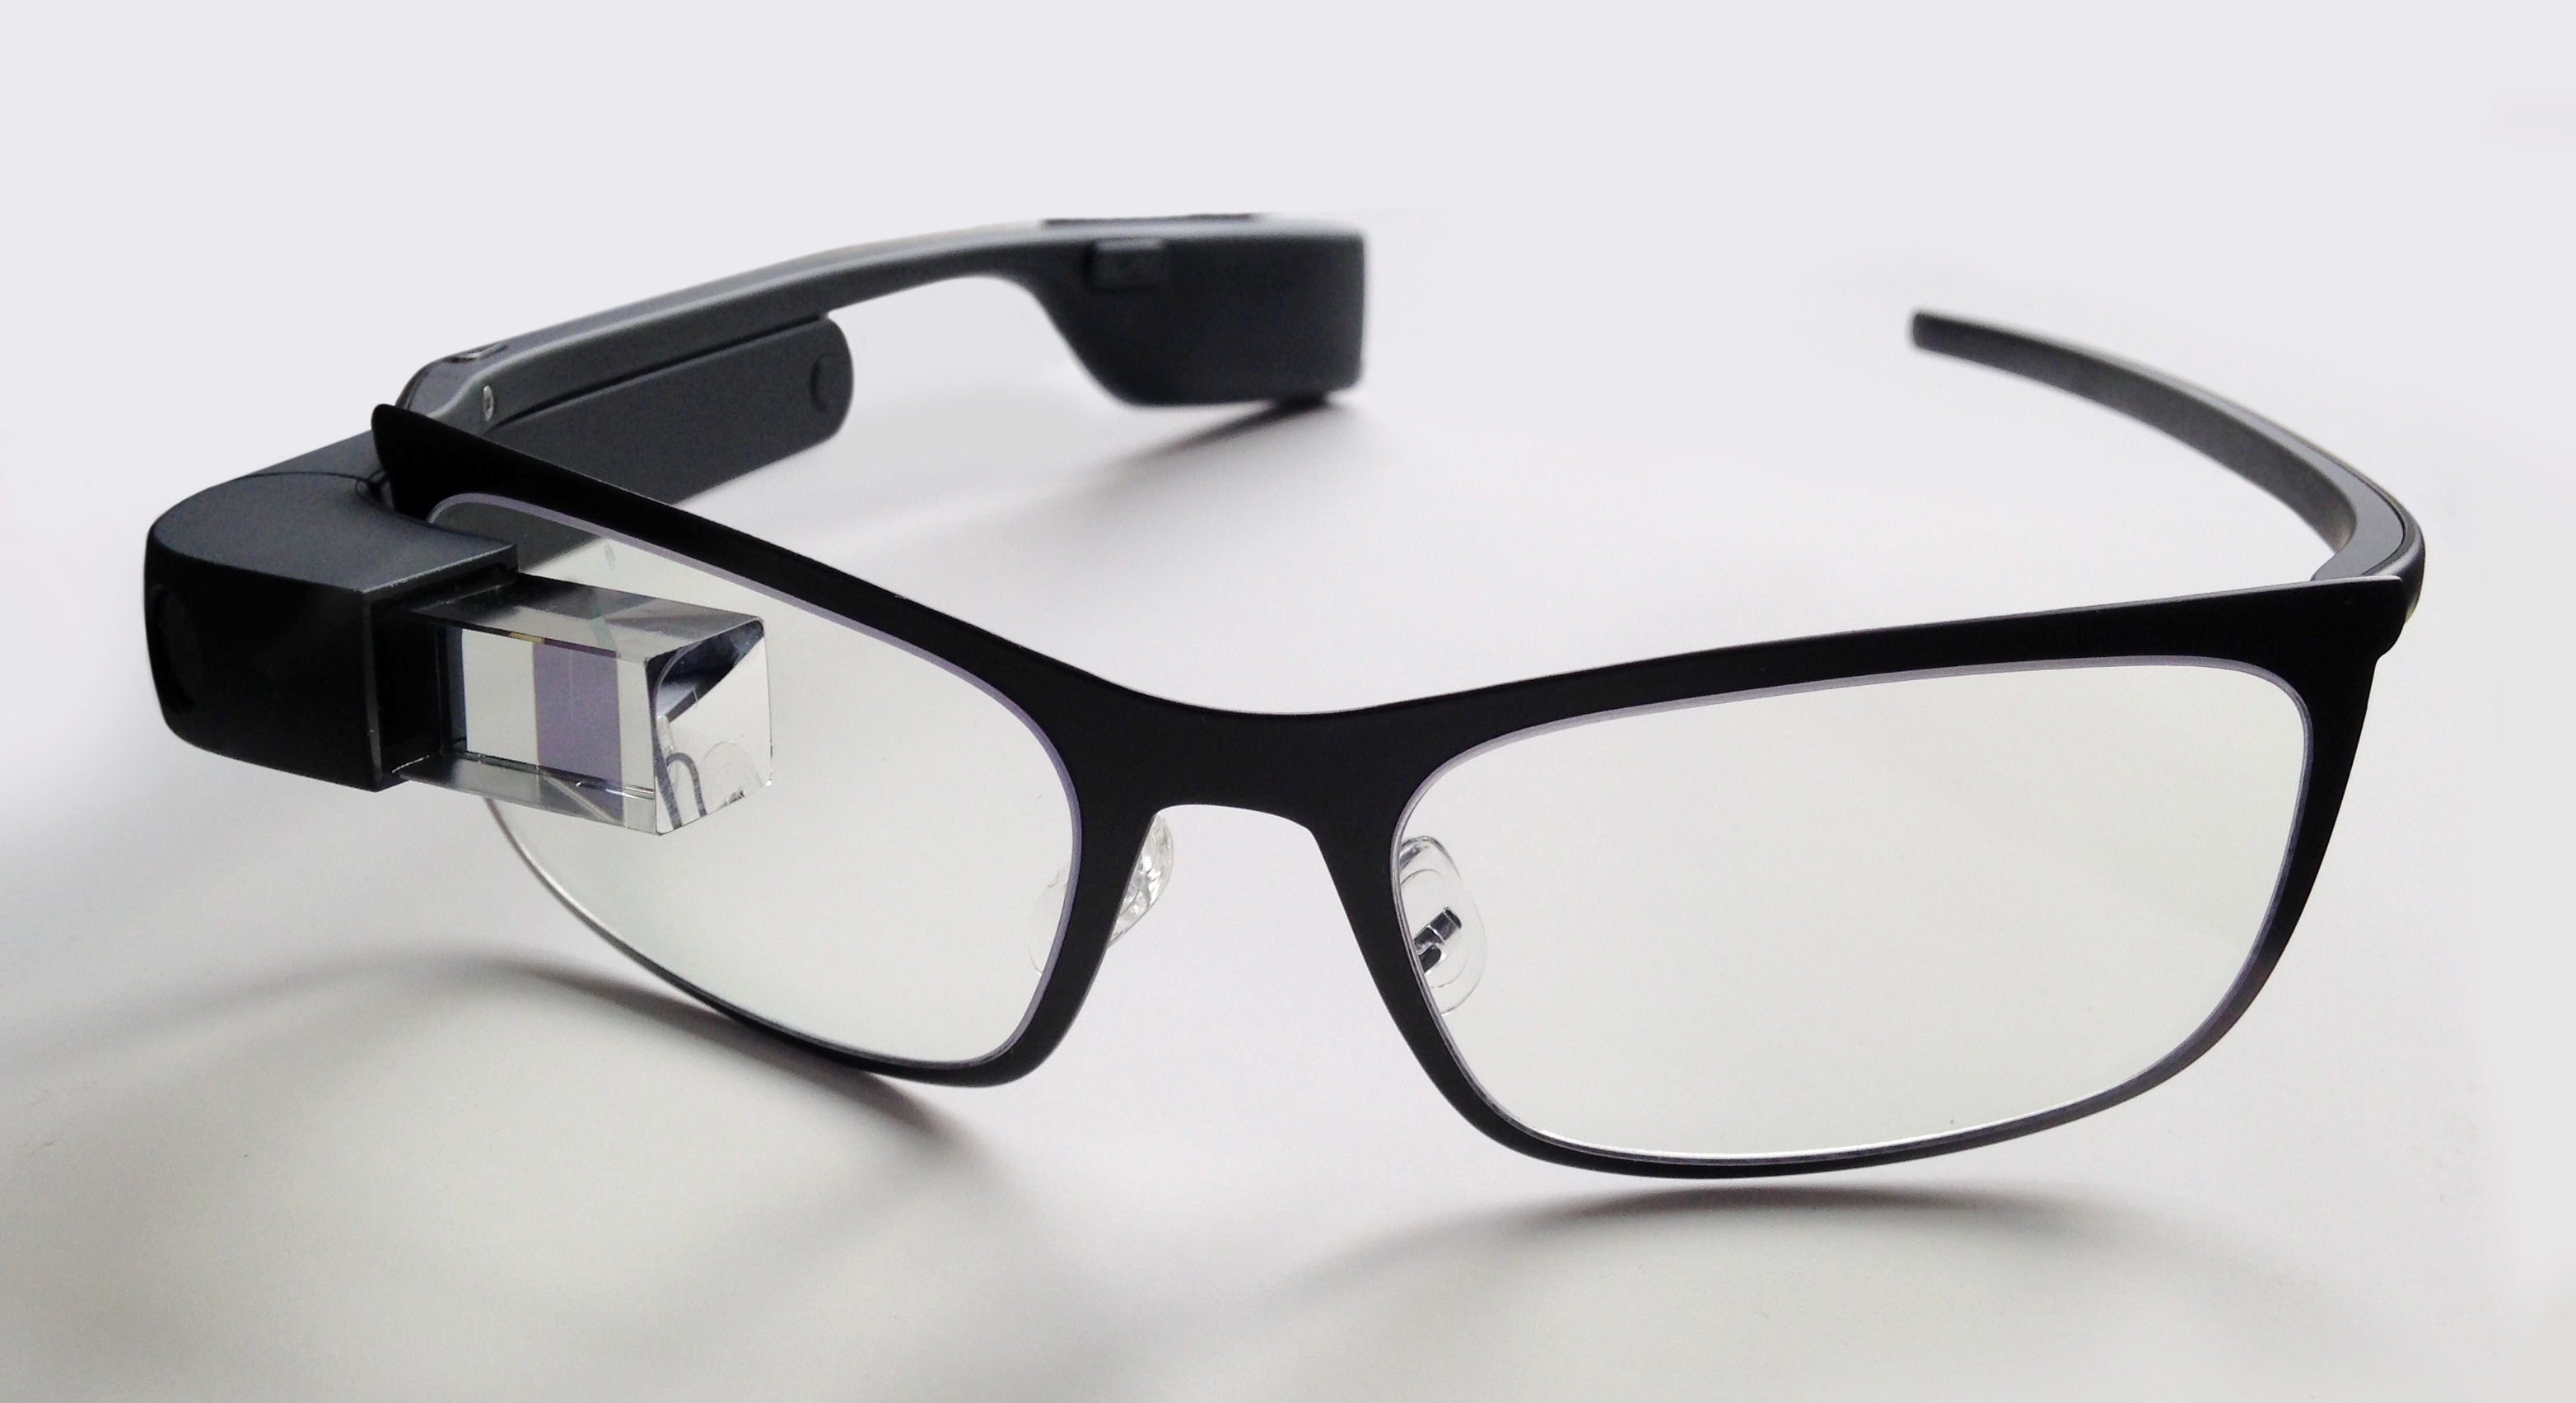 Google Glass brings specialists ...